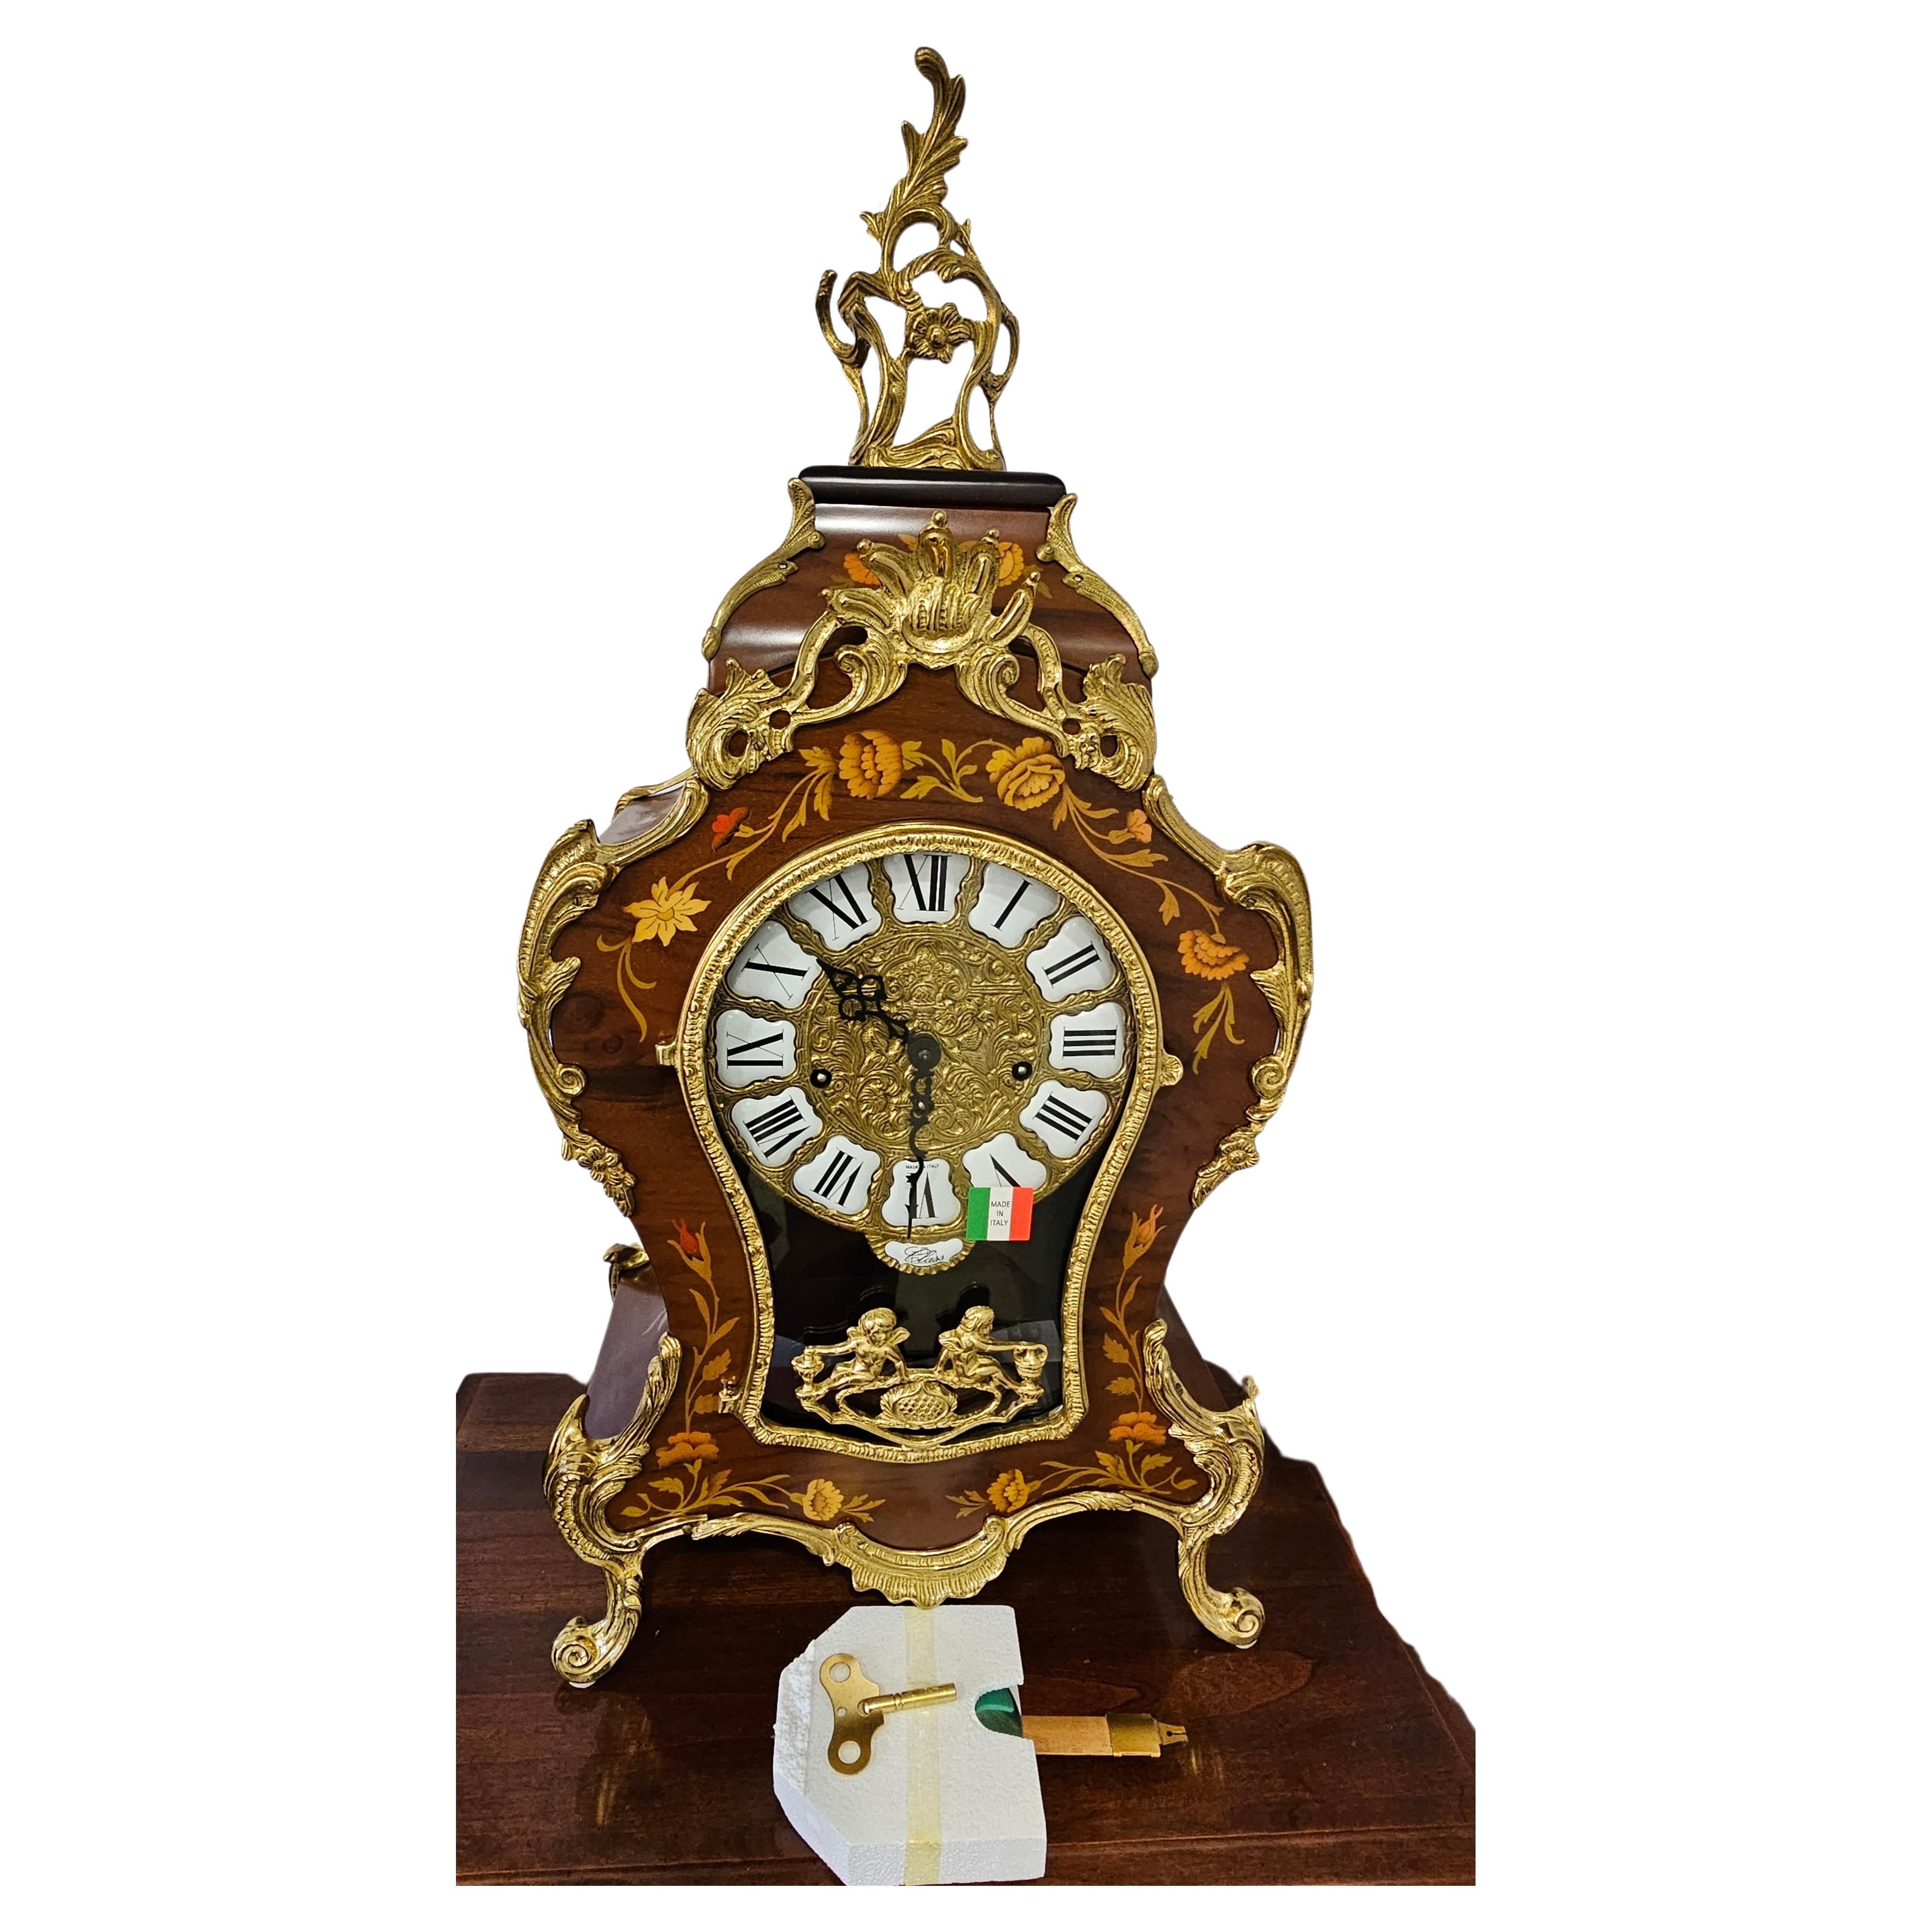 A 21st Century German Franz Hermle Mantel Clock in DeArt Italian Fine Marquetry and Ormolu Case in new open box condition.
Clock made in Germany by the historic, very famous Franz Hermle clock maker in the scintillating case made in Italy by DeArt, 